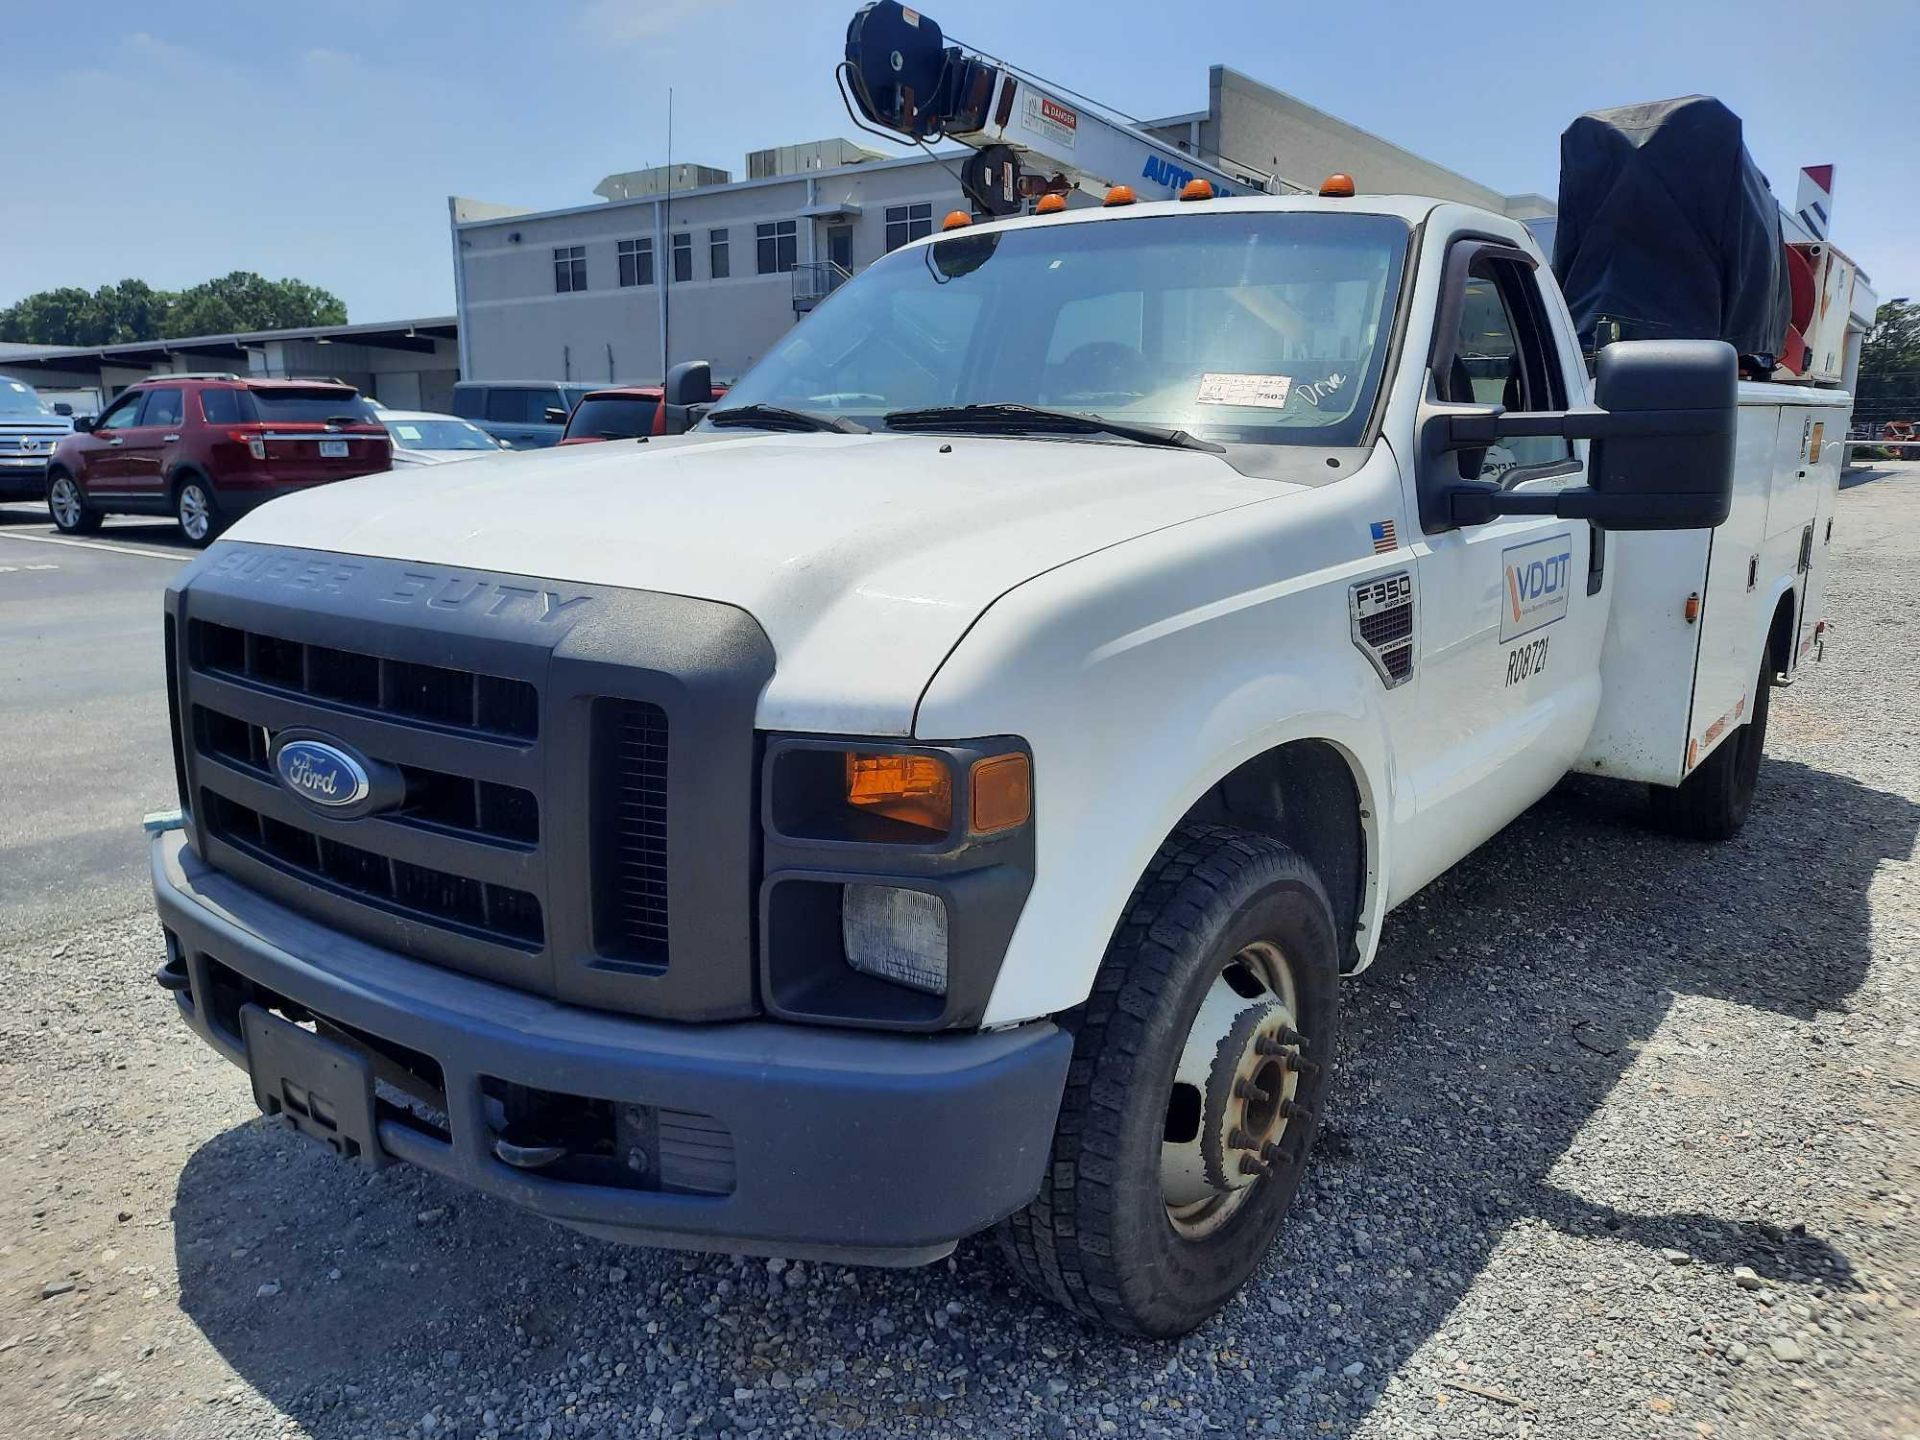 2008 Ford F350 Super Duty Service Truck - Image 2 of 32